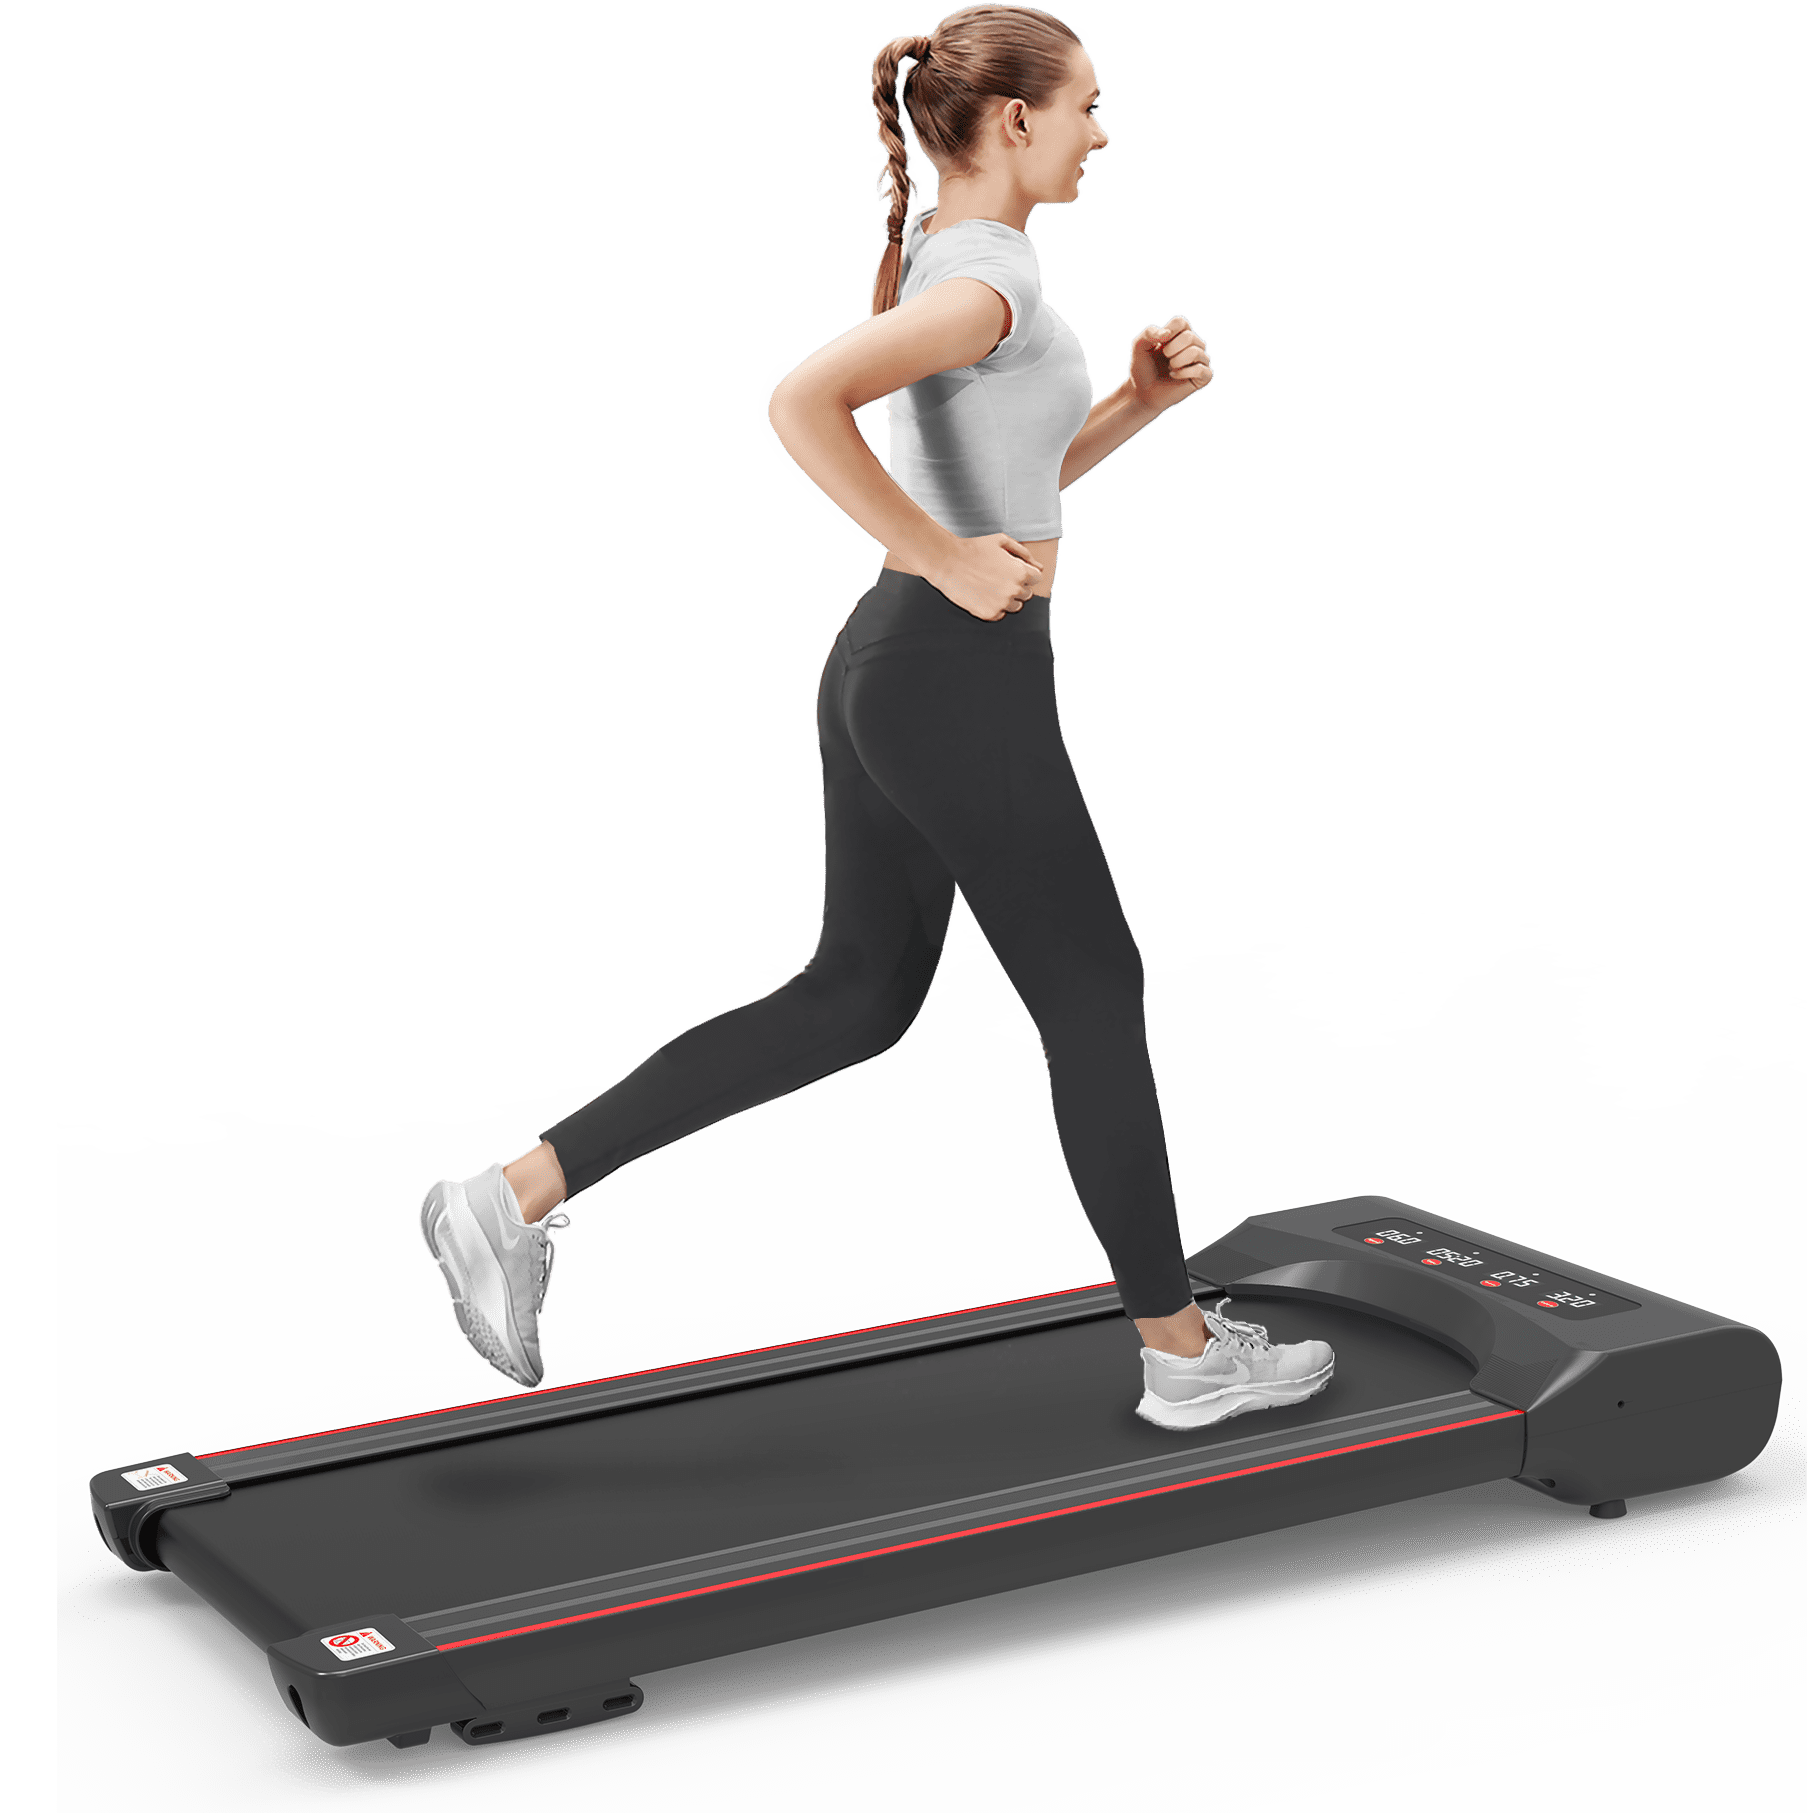 HLAiLL Treadmill for Home,Under Desk Treadmill Portable Walking  Pad,Adjustable Speed, LCD Screen & Calorie Counter, Ultra Thin and Silent,  Intended